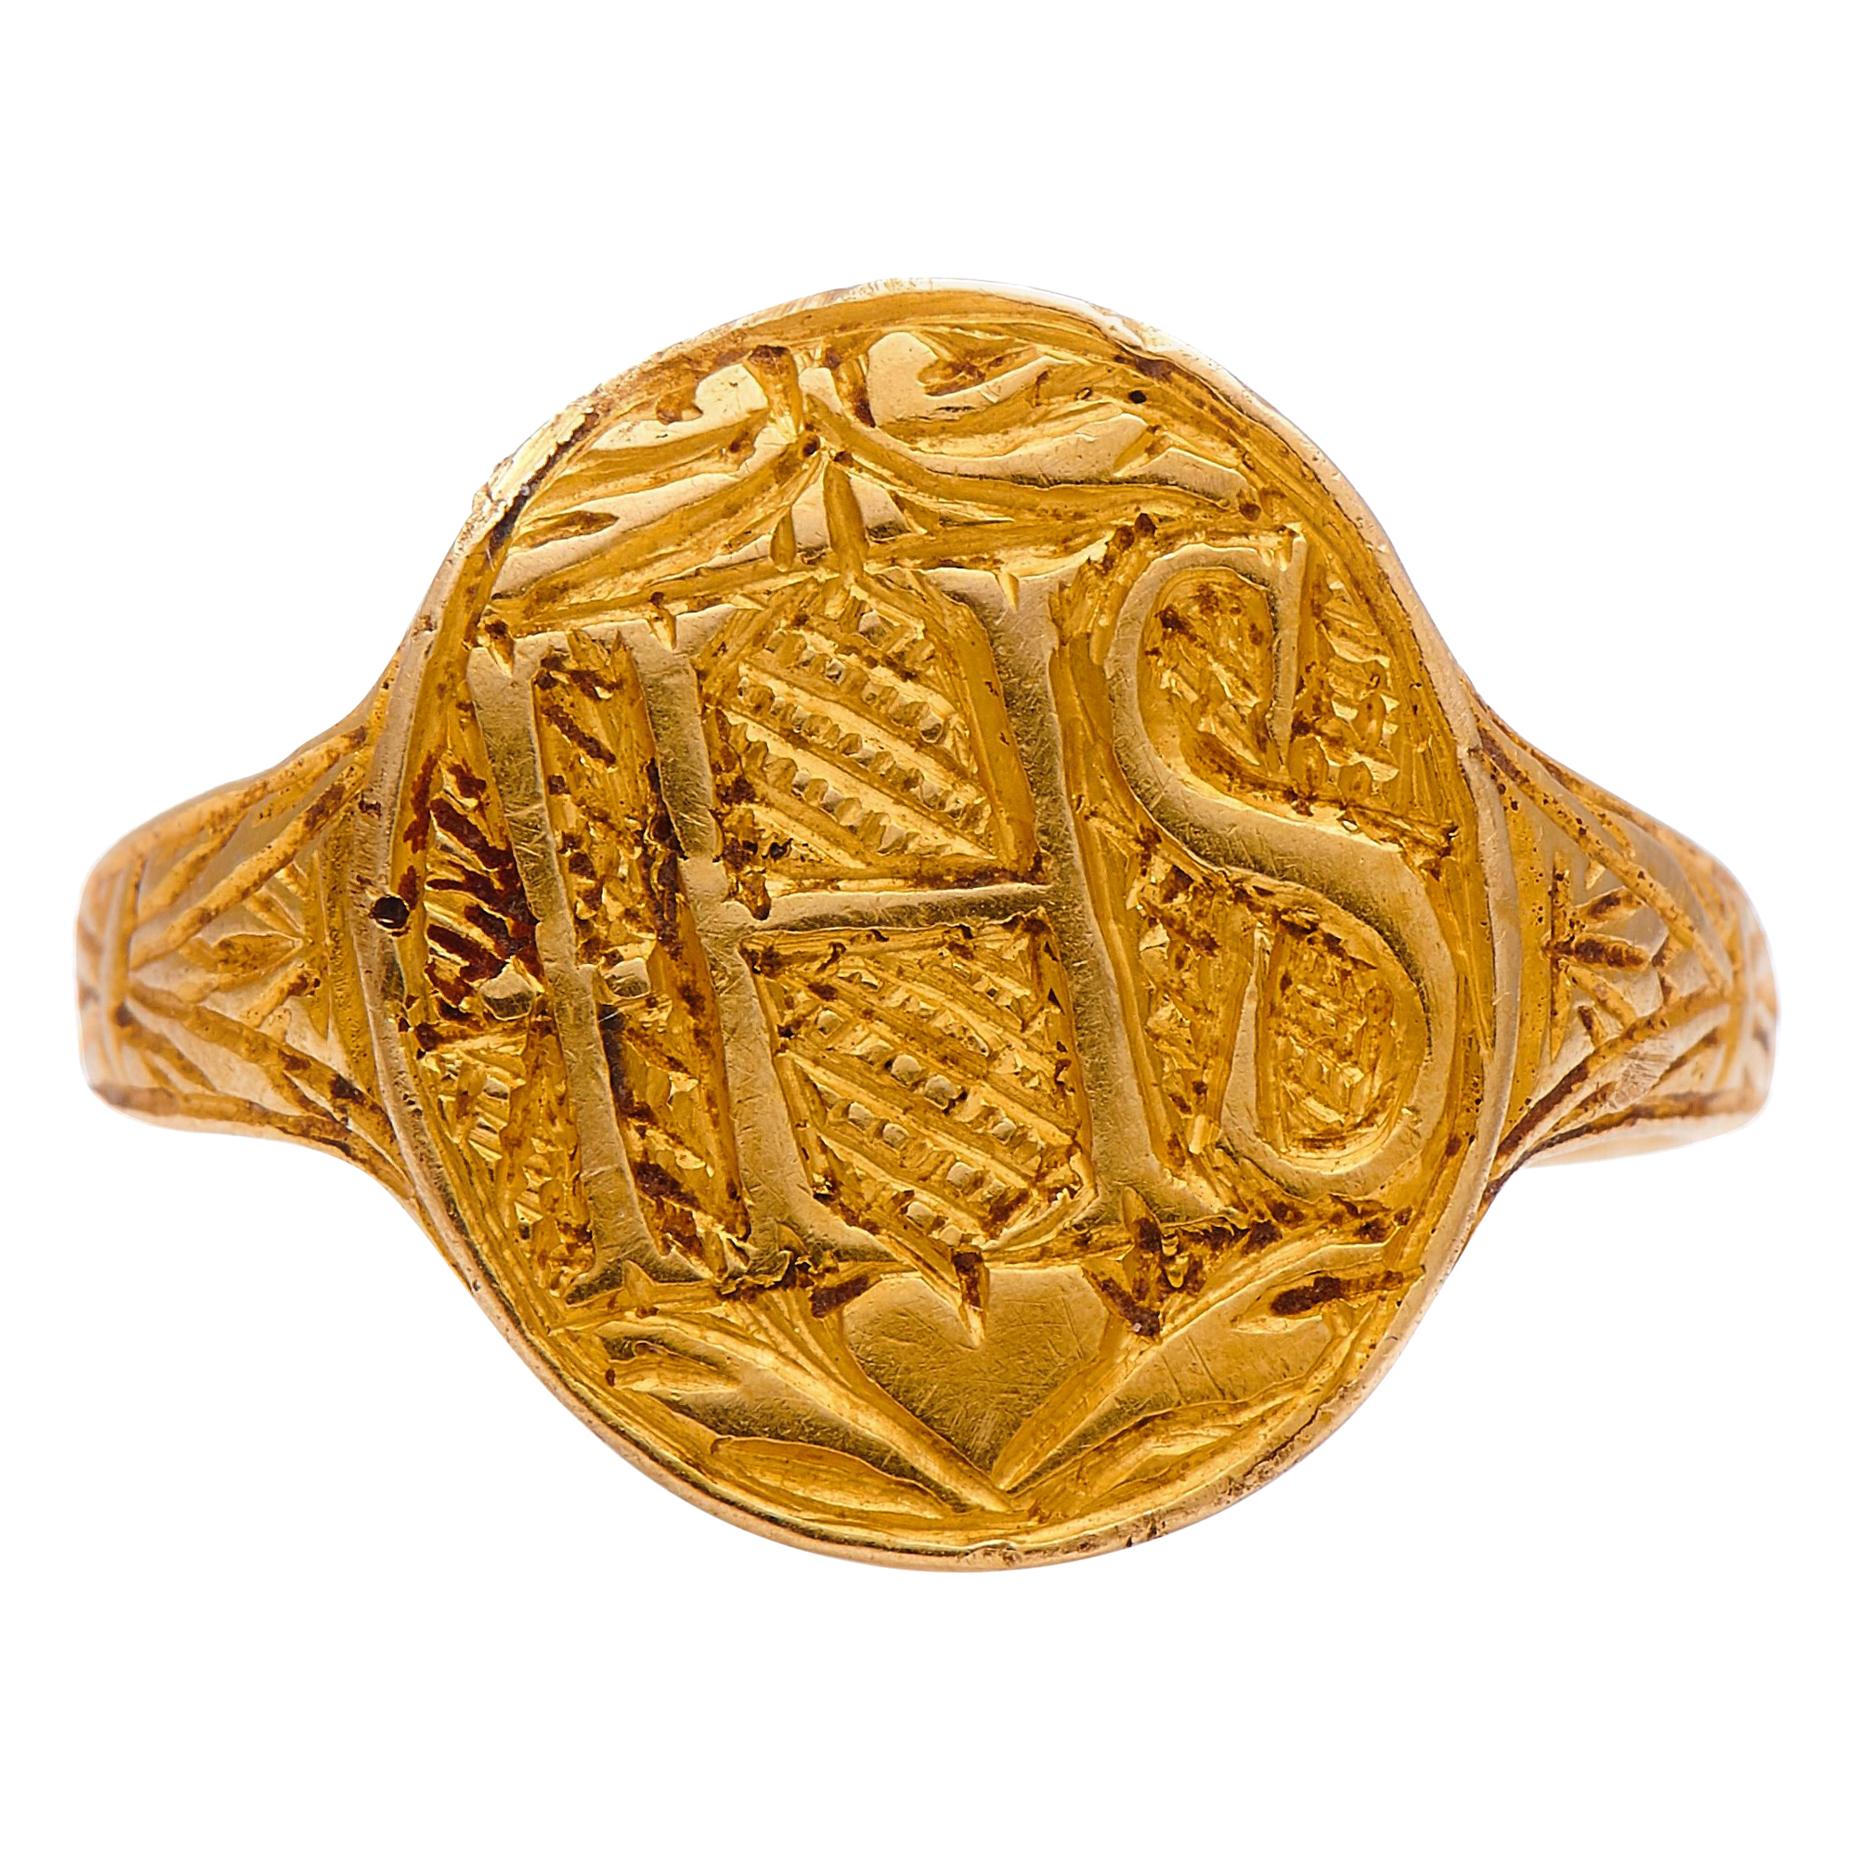 Rare, Early, 17th Century Gold, Signet Ring